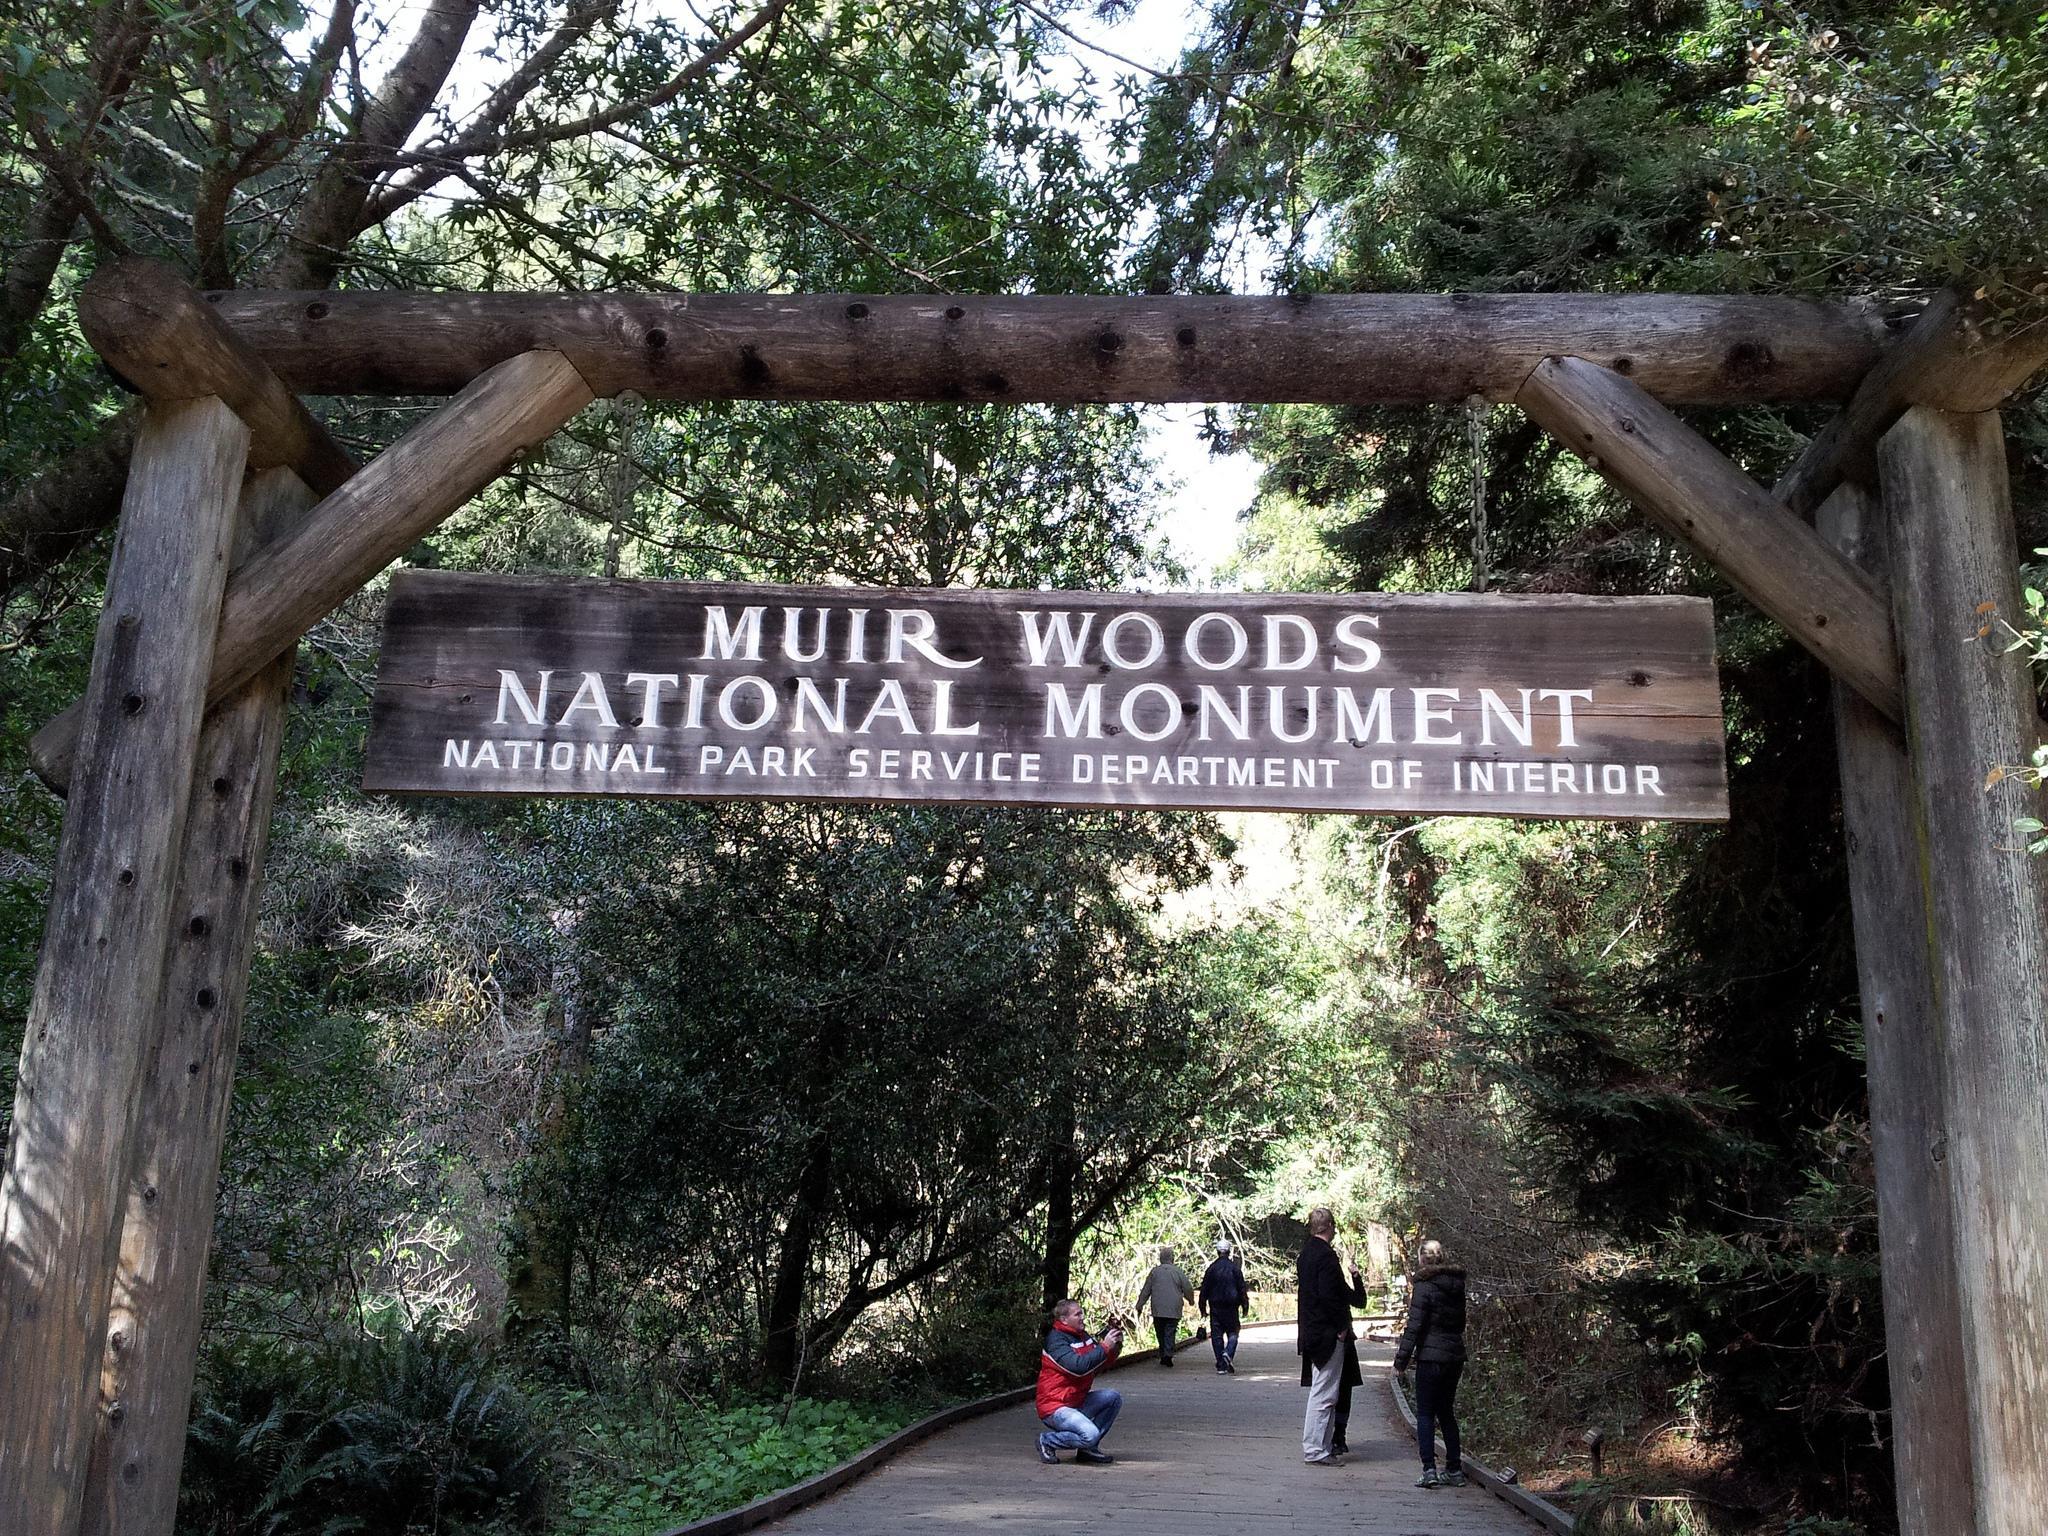 Enter tranquility. Muir Woods National Monument, CA. en.wi